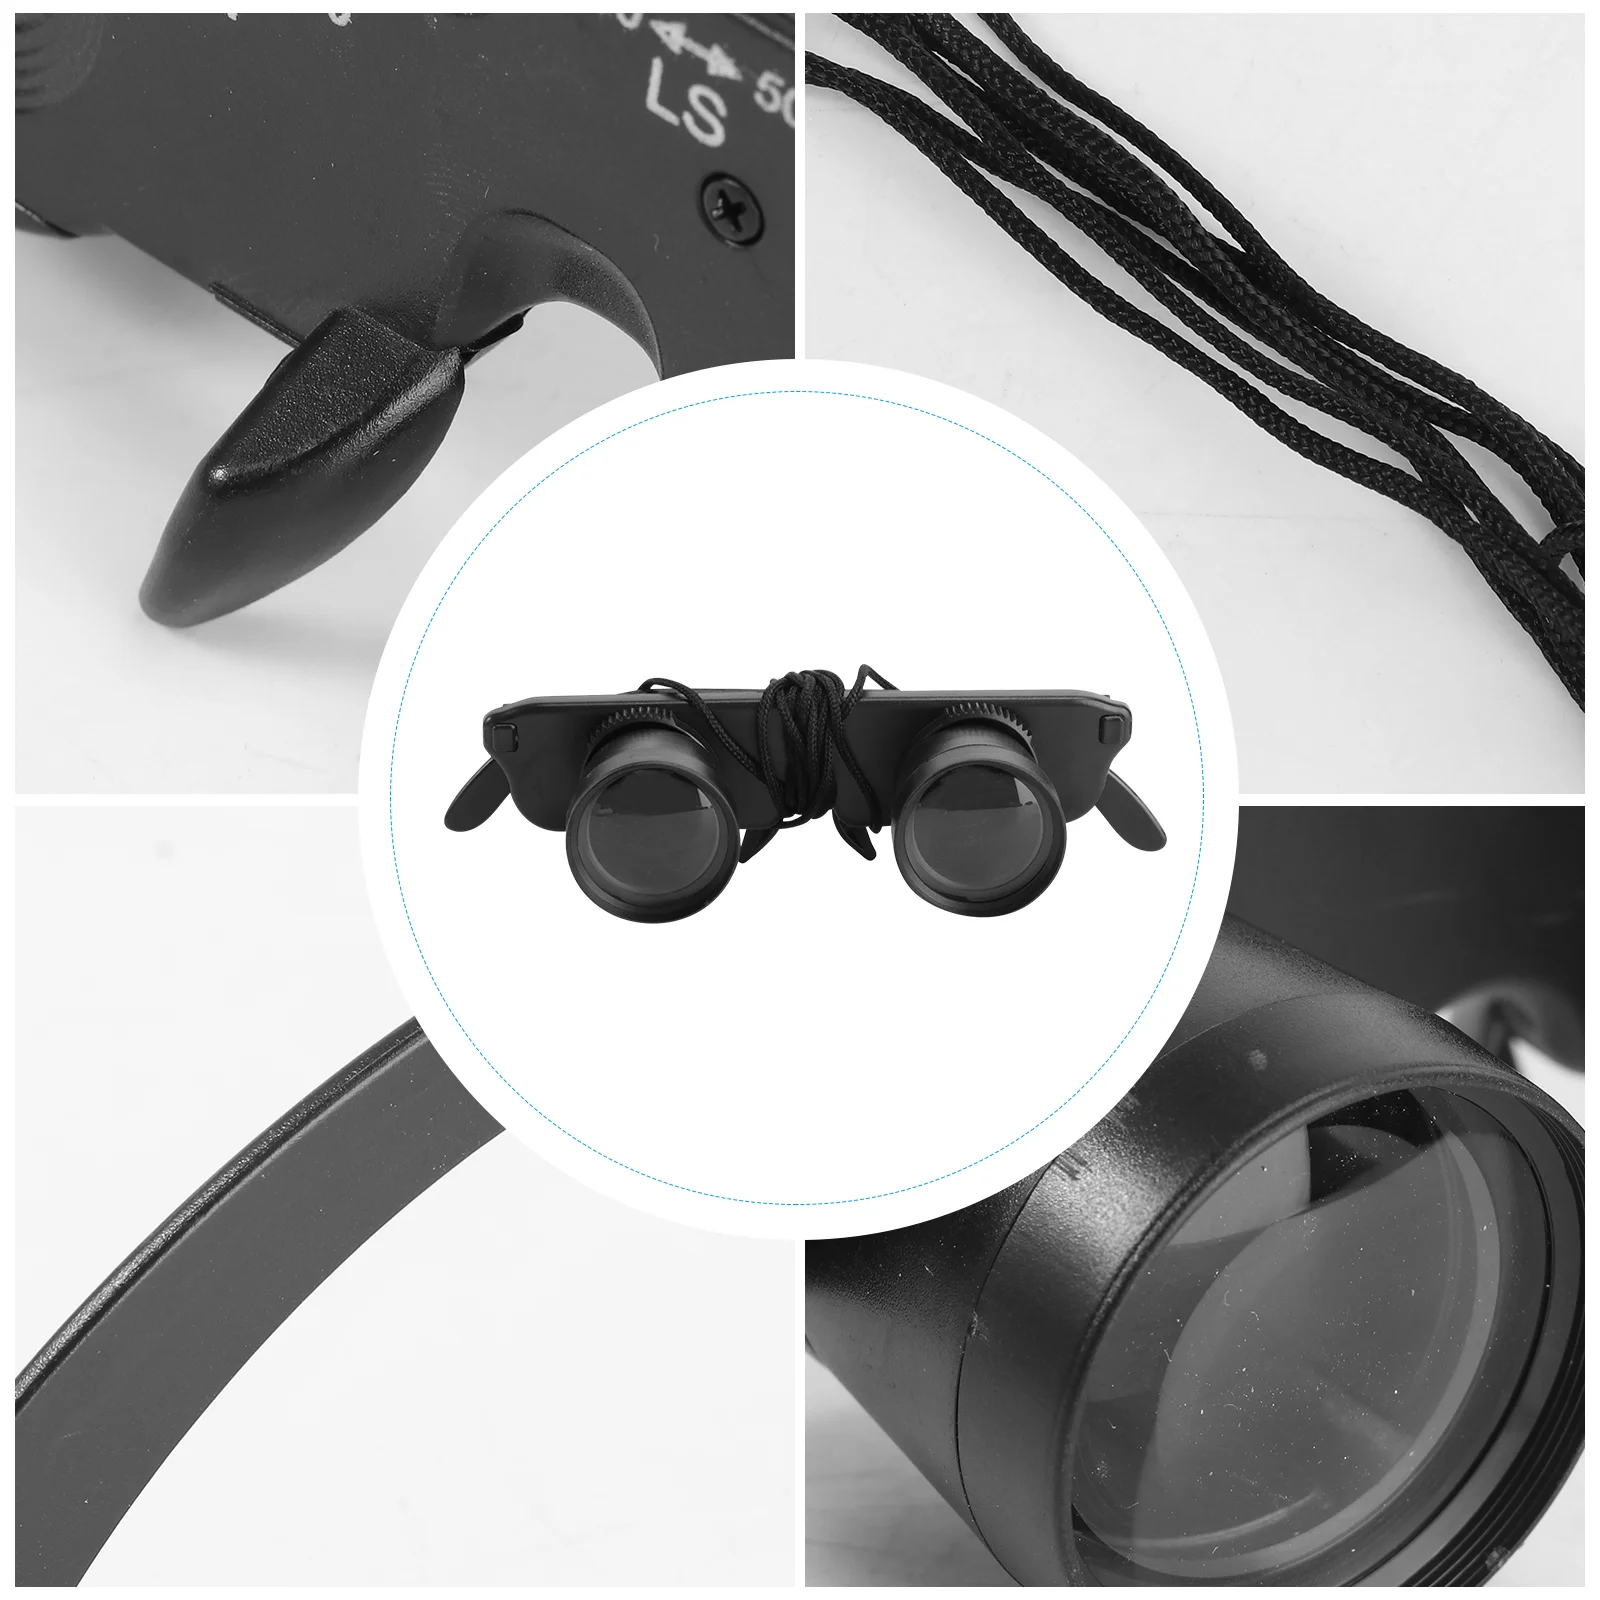 

Far Mirror Fishing Gear Outdoor Magnifying Watching Clear High Definition Headworn Glass Light Hands Free Opera glasses